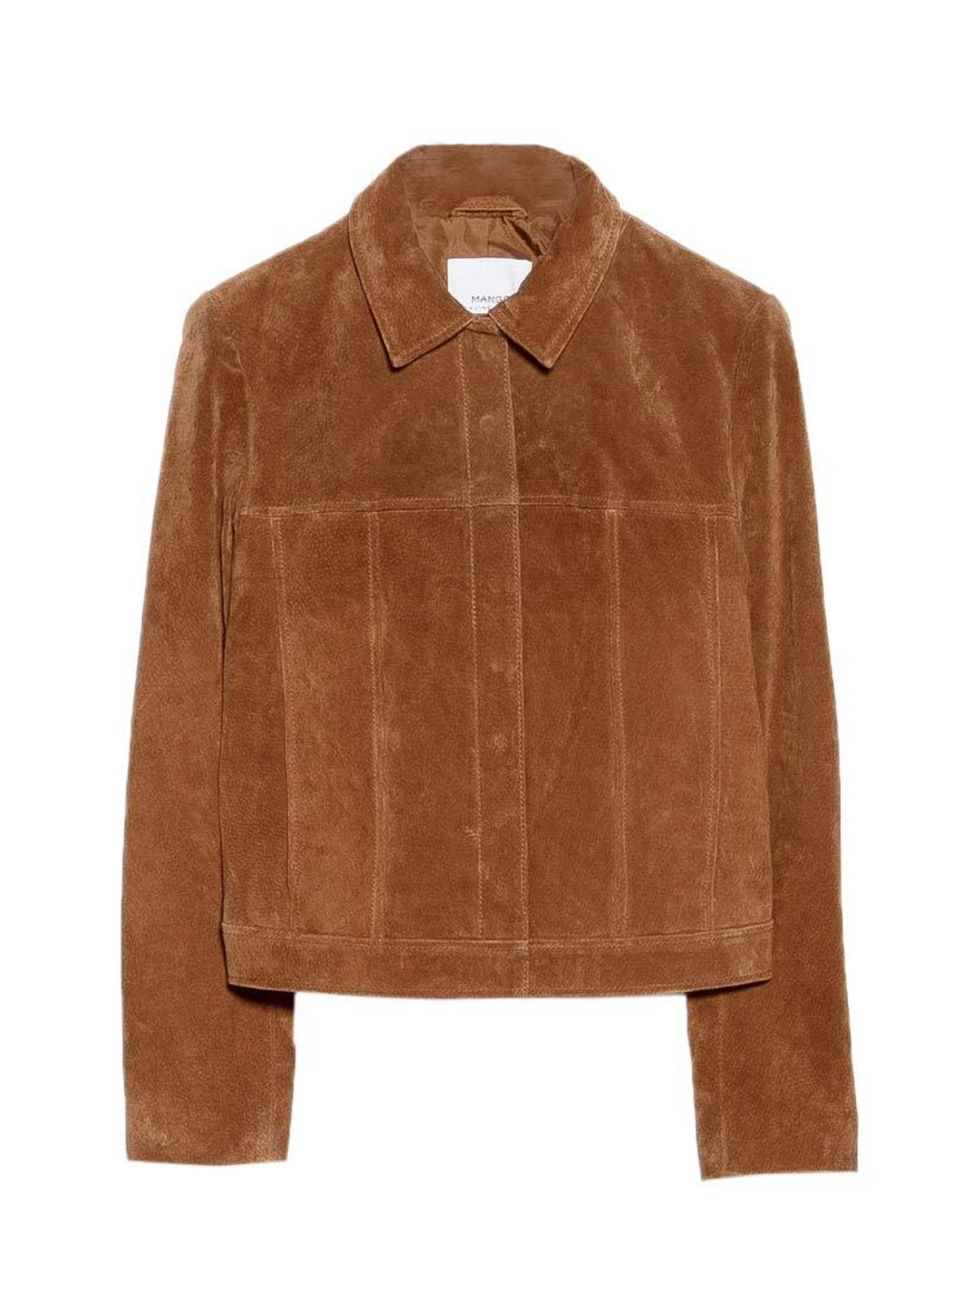 <p>Fashion Assistant Charlie Gowans-Eglinton couldn't resist this boxy suede jacket.</p>

<p><a href="http://shop.mango.com/GB/p0/women/new/suede-jacket/?id=43043650_08&n=1&s=nuevo&ident=0__0_1424453360108&ts=1424453360108" target="_blank">Mango</a> jacke